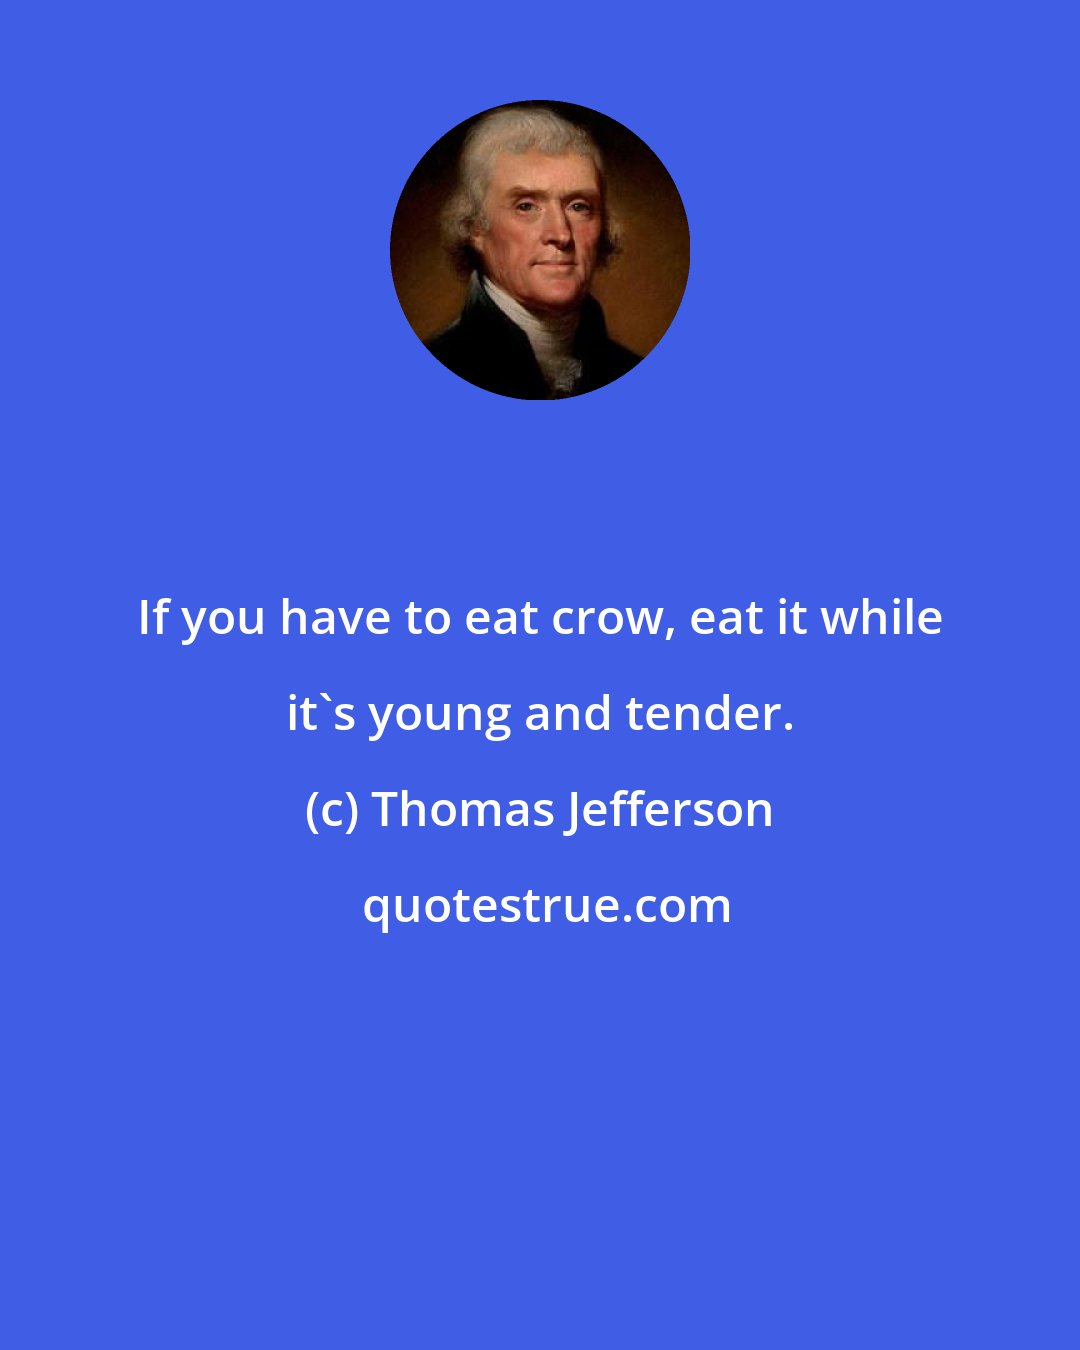 Thomas Jefferson: If you have to eat crow, eat it while it's young and tender.